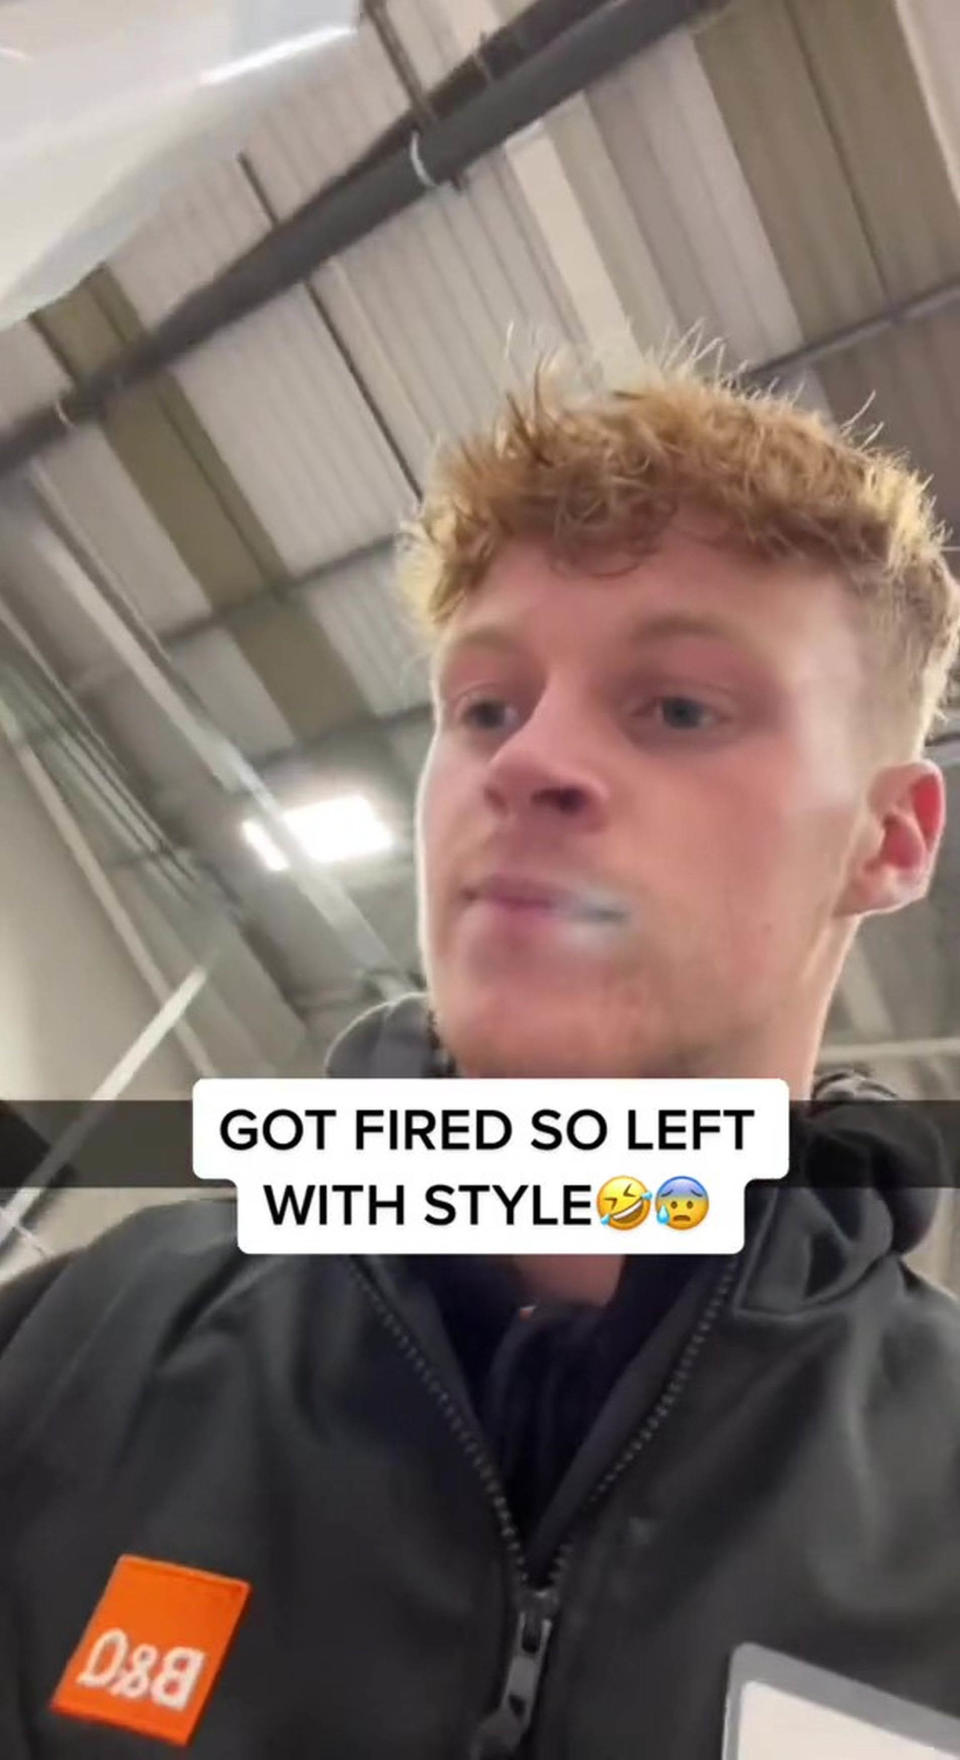 PIC FROM Kennedy News and Media (PICTURED: SACKED B&Q WIORKER ADAM POWIS, 18, TELLING COLLEAGUES THEY'RE 'C**S' AND DECLARING 'F**K EVERYONE' ON THE TANNOY WHILE CUSTOMERS SHOP )  A sacked B&Q worker has been banned from EVERY STORE in the UK - after branding his colleagues 'c**ts' and declaring 'f**k everyone' in an explosive final customer announcement. Adam Powis filmed himself as he broadcast his foul-mouthed farewell across the hardware giant's branch in Weston-super-Mare, North Somerset, on November 11. A viral video shot by the 18-year-old shows him calmly declaring 'this is a customer announcement. I just got sacked and B&Q are c**ts. F**k everyone. Have a nice day'. DISCLAIMER: While Kennedy News and Media uses its best endeavours to establish the copyright and authenticity of all pictures supplied, it accepts no liability for any damage, loss or legal action caused by the use of images supplied and the publication of images is solely at your discretion. SEE KENNEDY NEWS COPY - 0161 697 4266  
